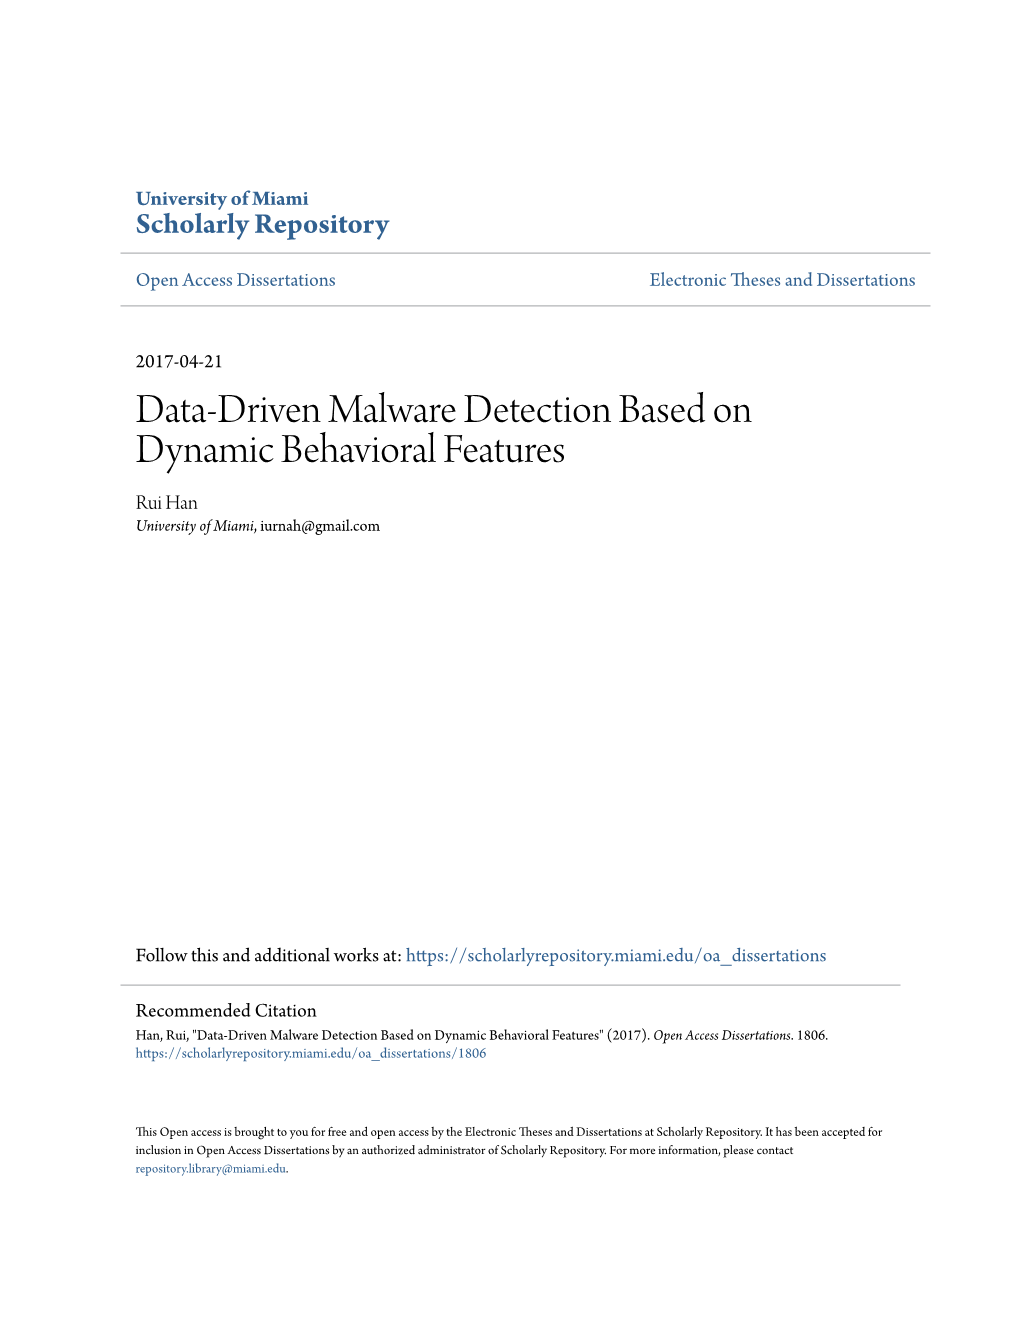 Data-Driven Malware Detection Based on Dynamic Behavioral Features Rui Han University of Miami, Iurnah@Gmail.Com